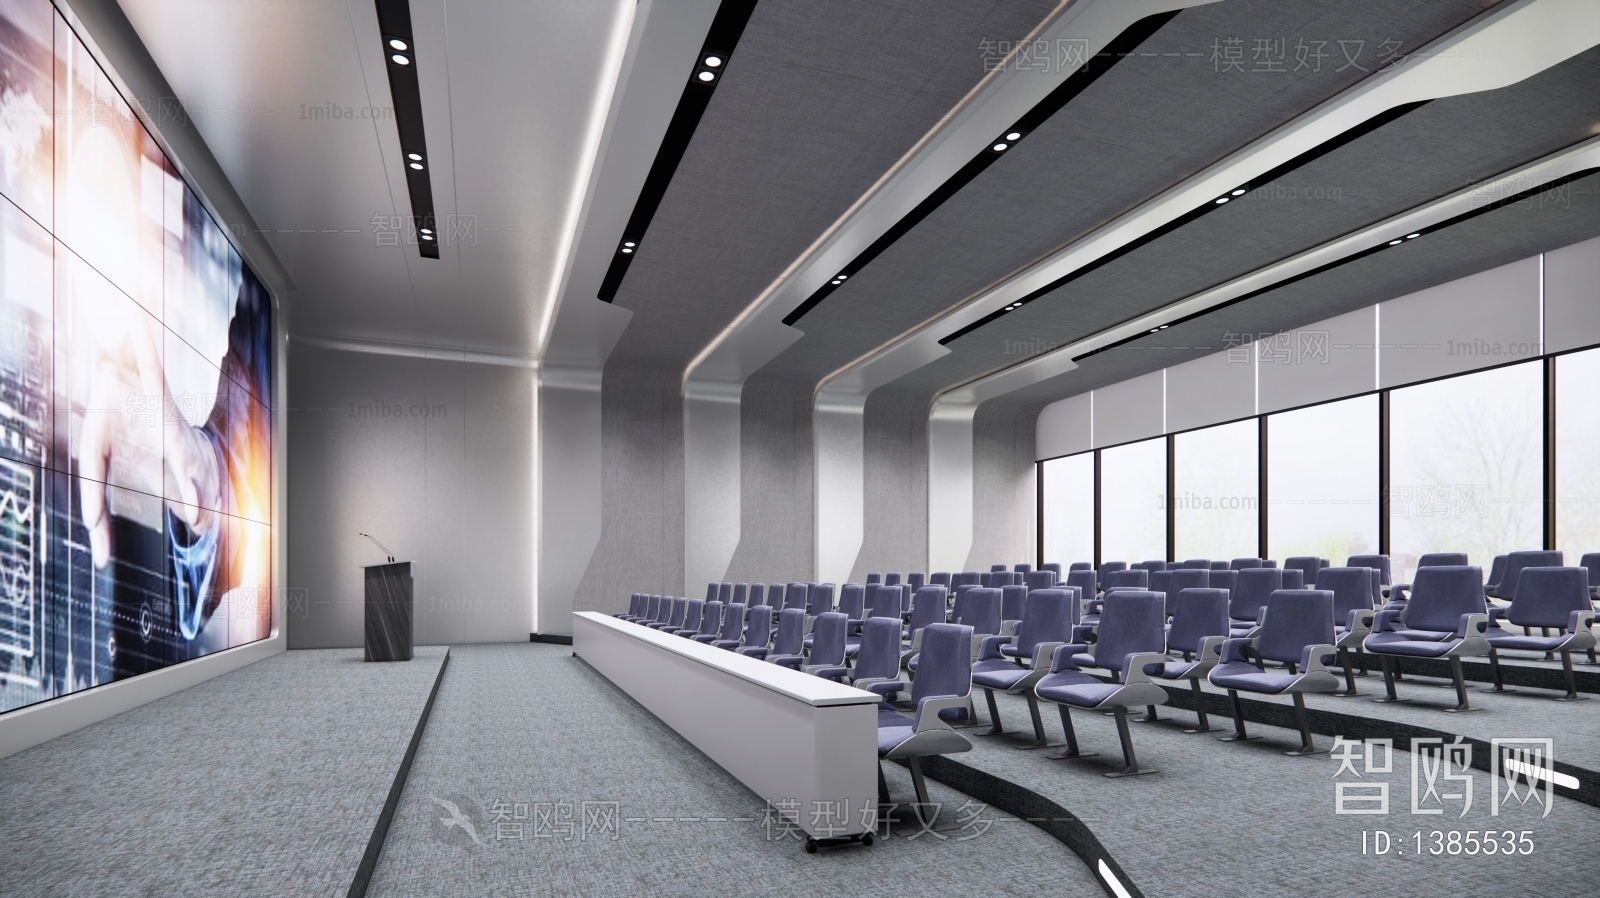 Modern Office Lecture Hall